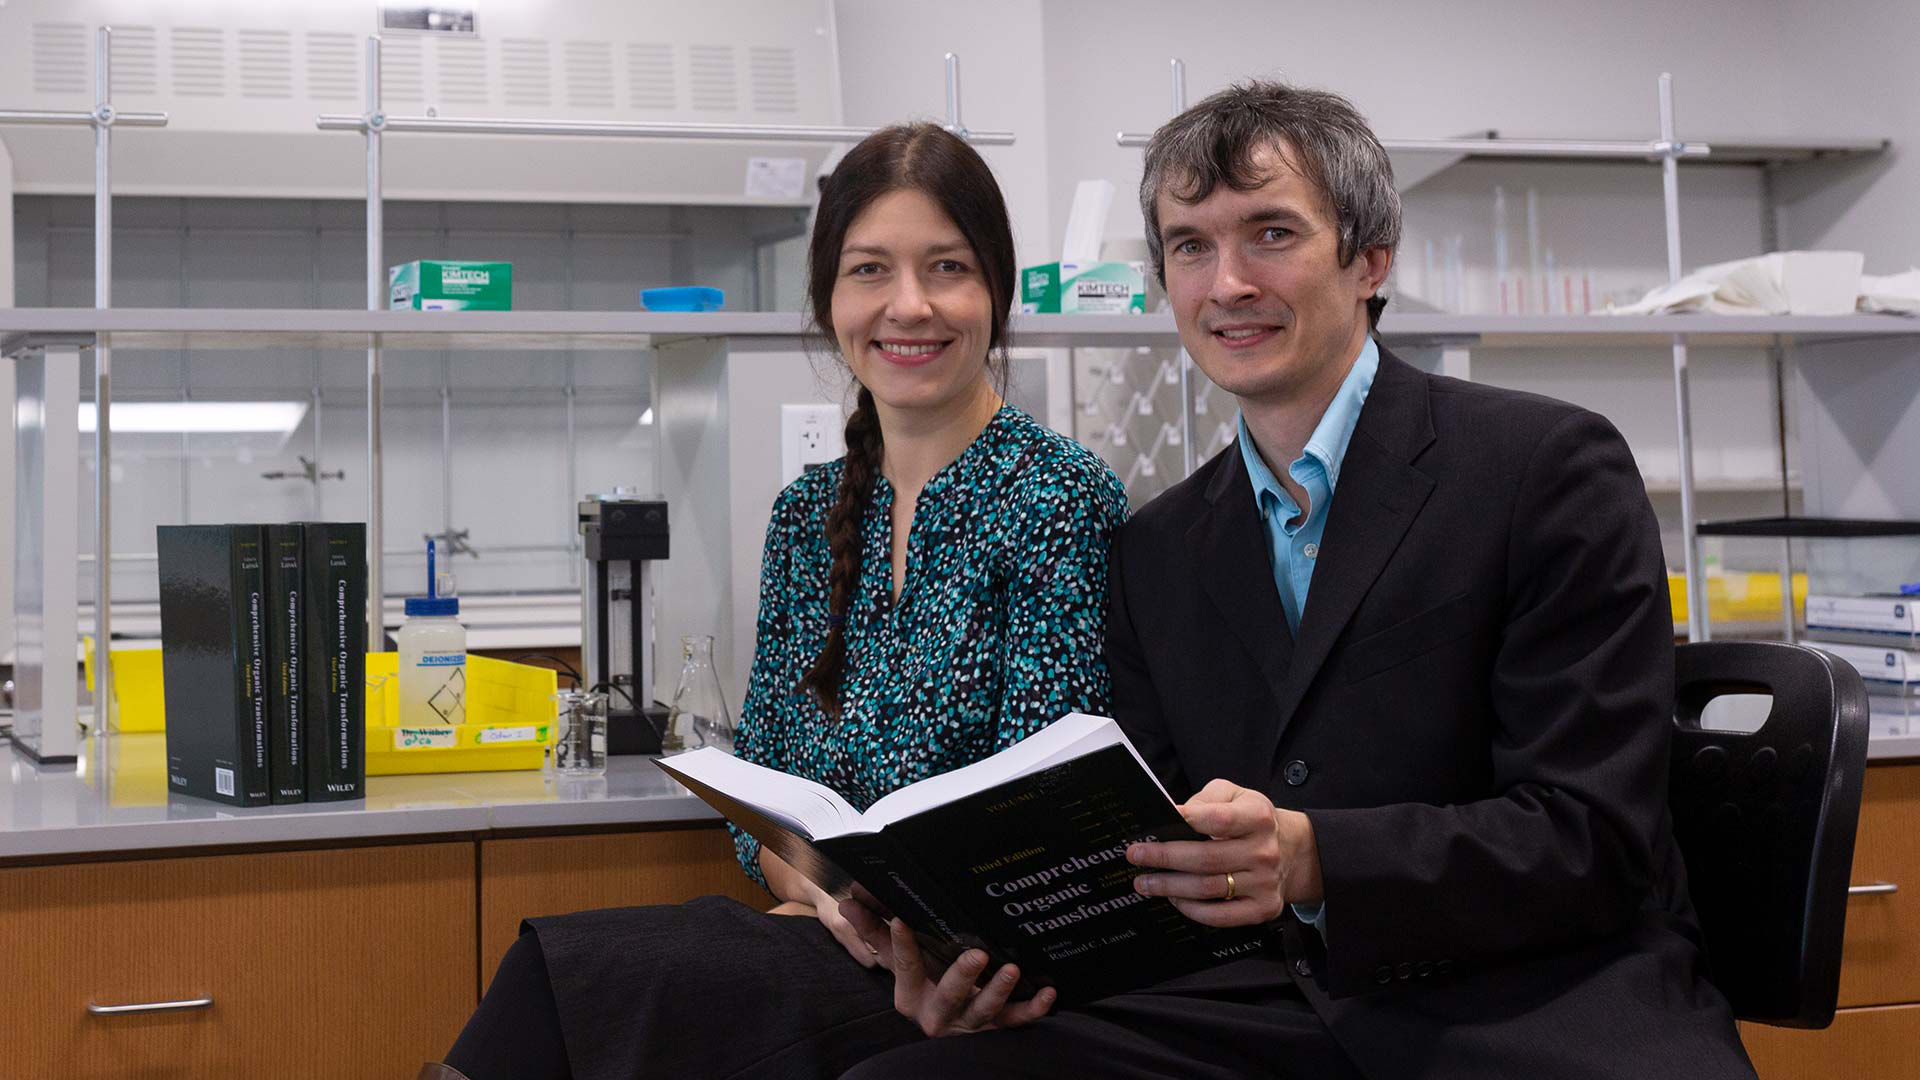 UHCL profs update comprehensive chemistry reference book, are nominated for award